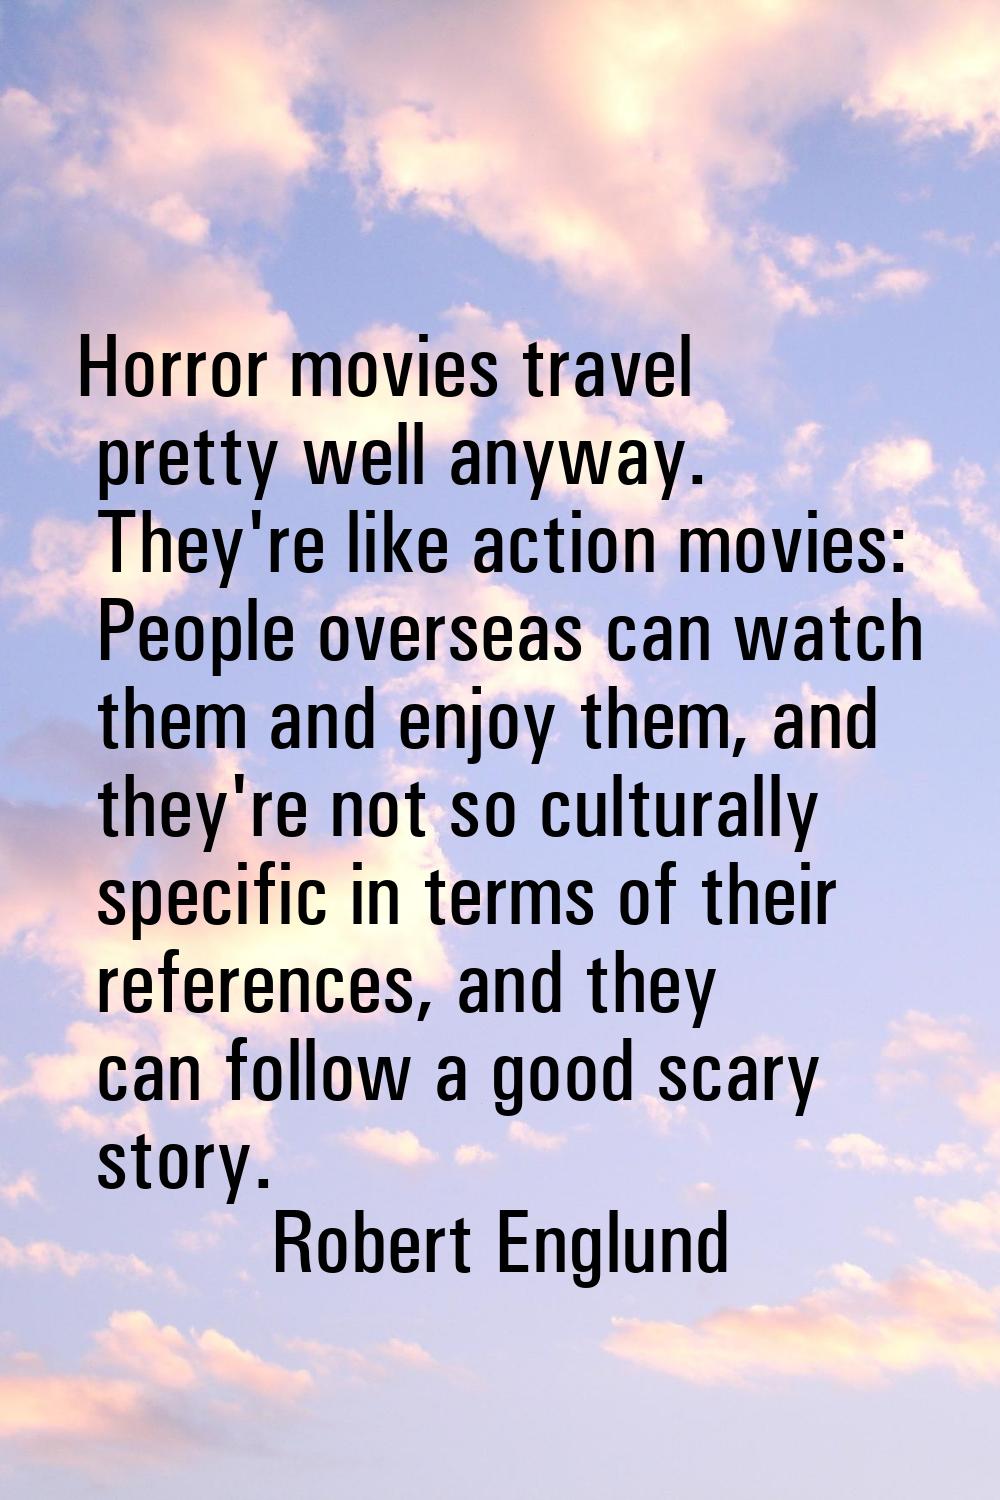 Horror movies travel pretty well anyway. They're like action movies: People overseas can watch them